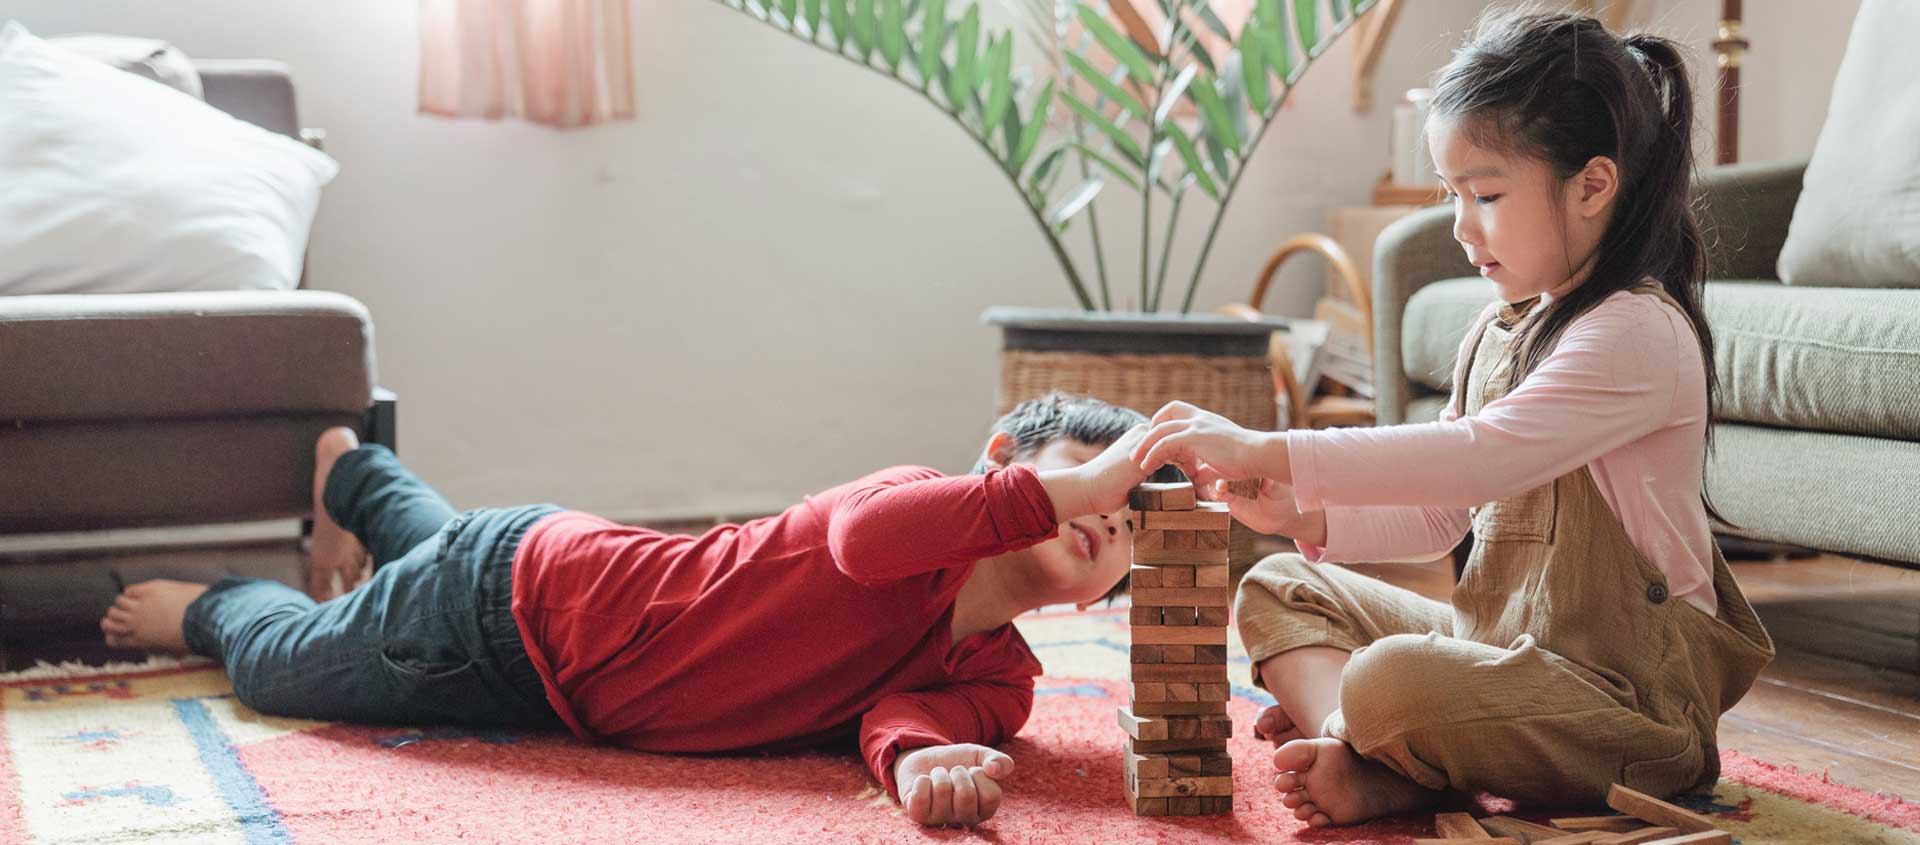 Two children - a boy and a girl - stacking a tower of blocks.